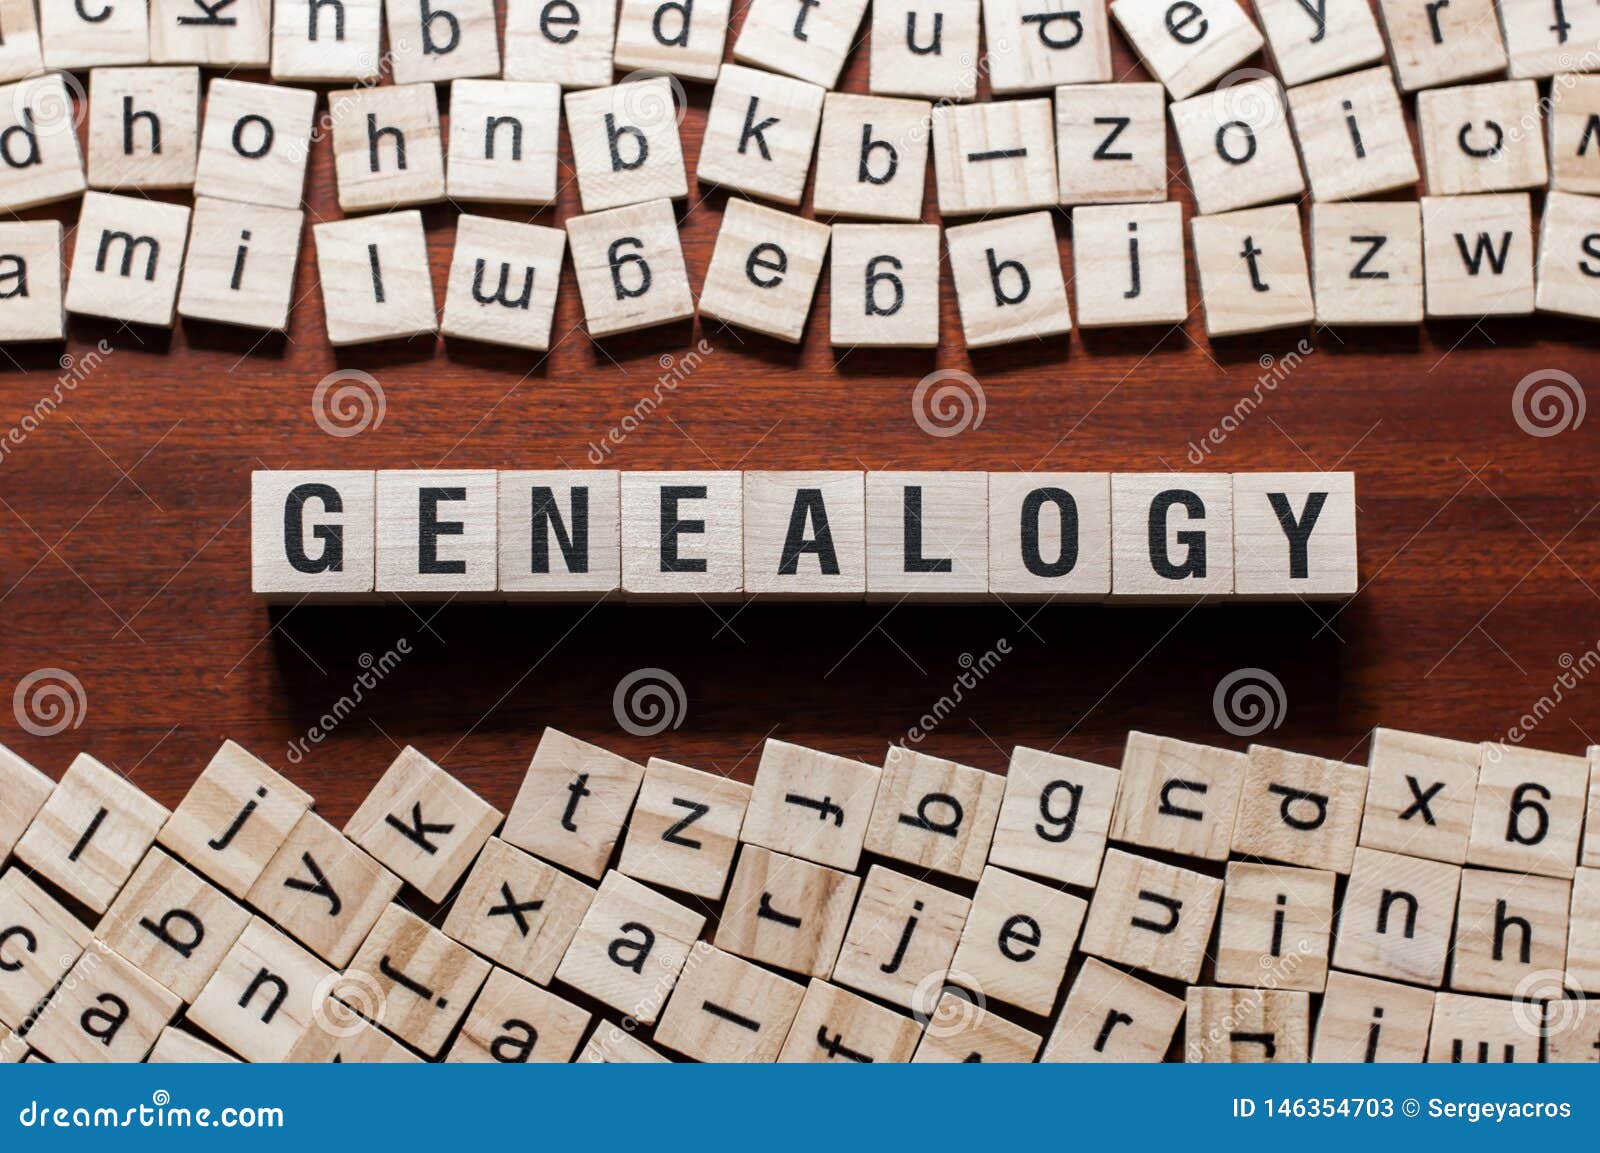 genealogy word concept on cubes